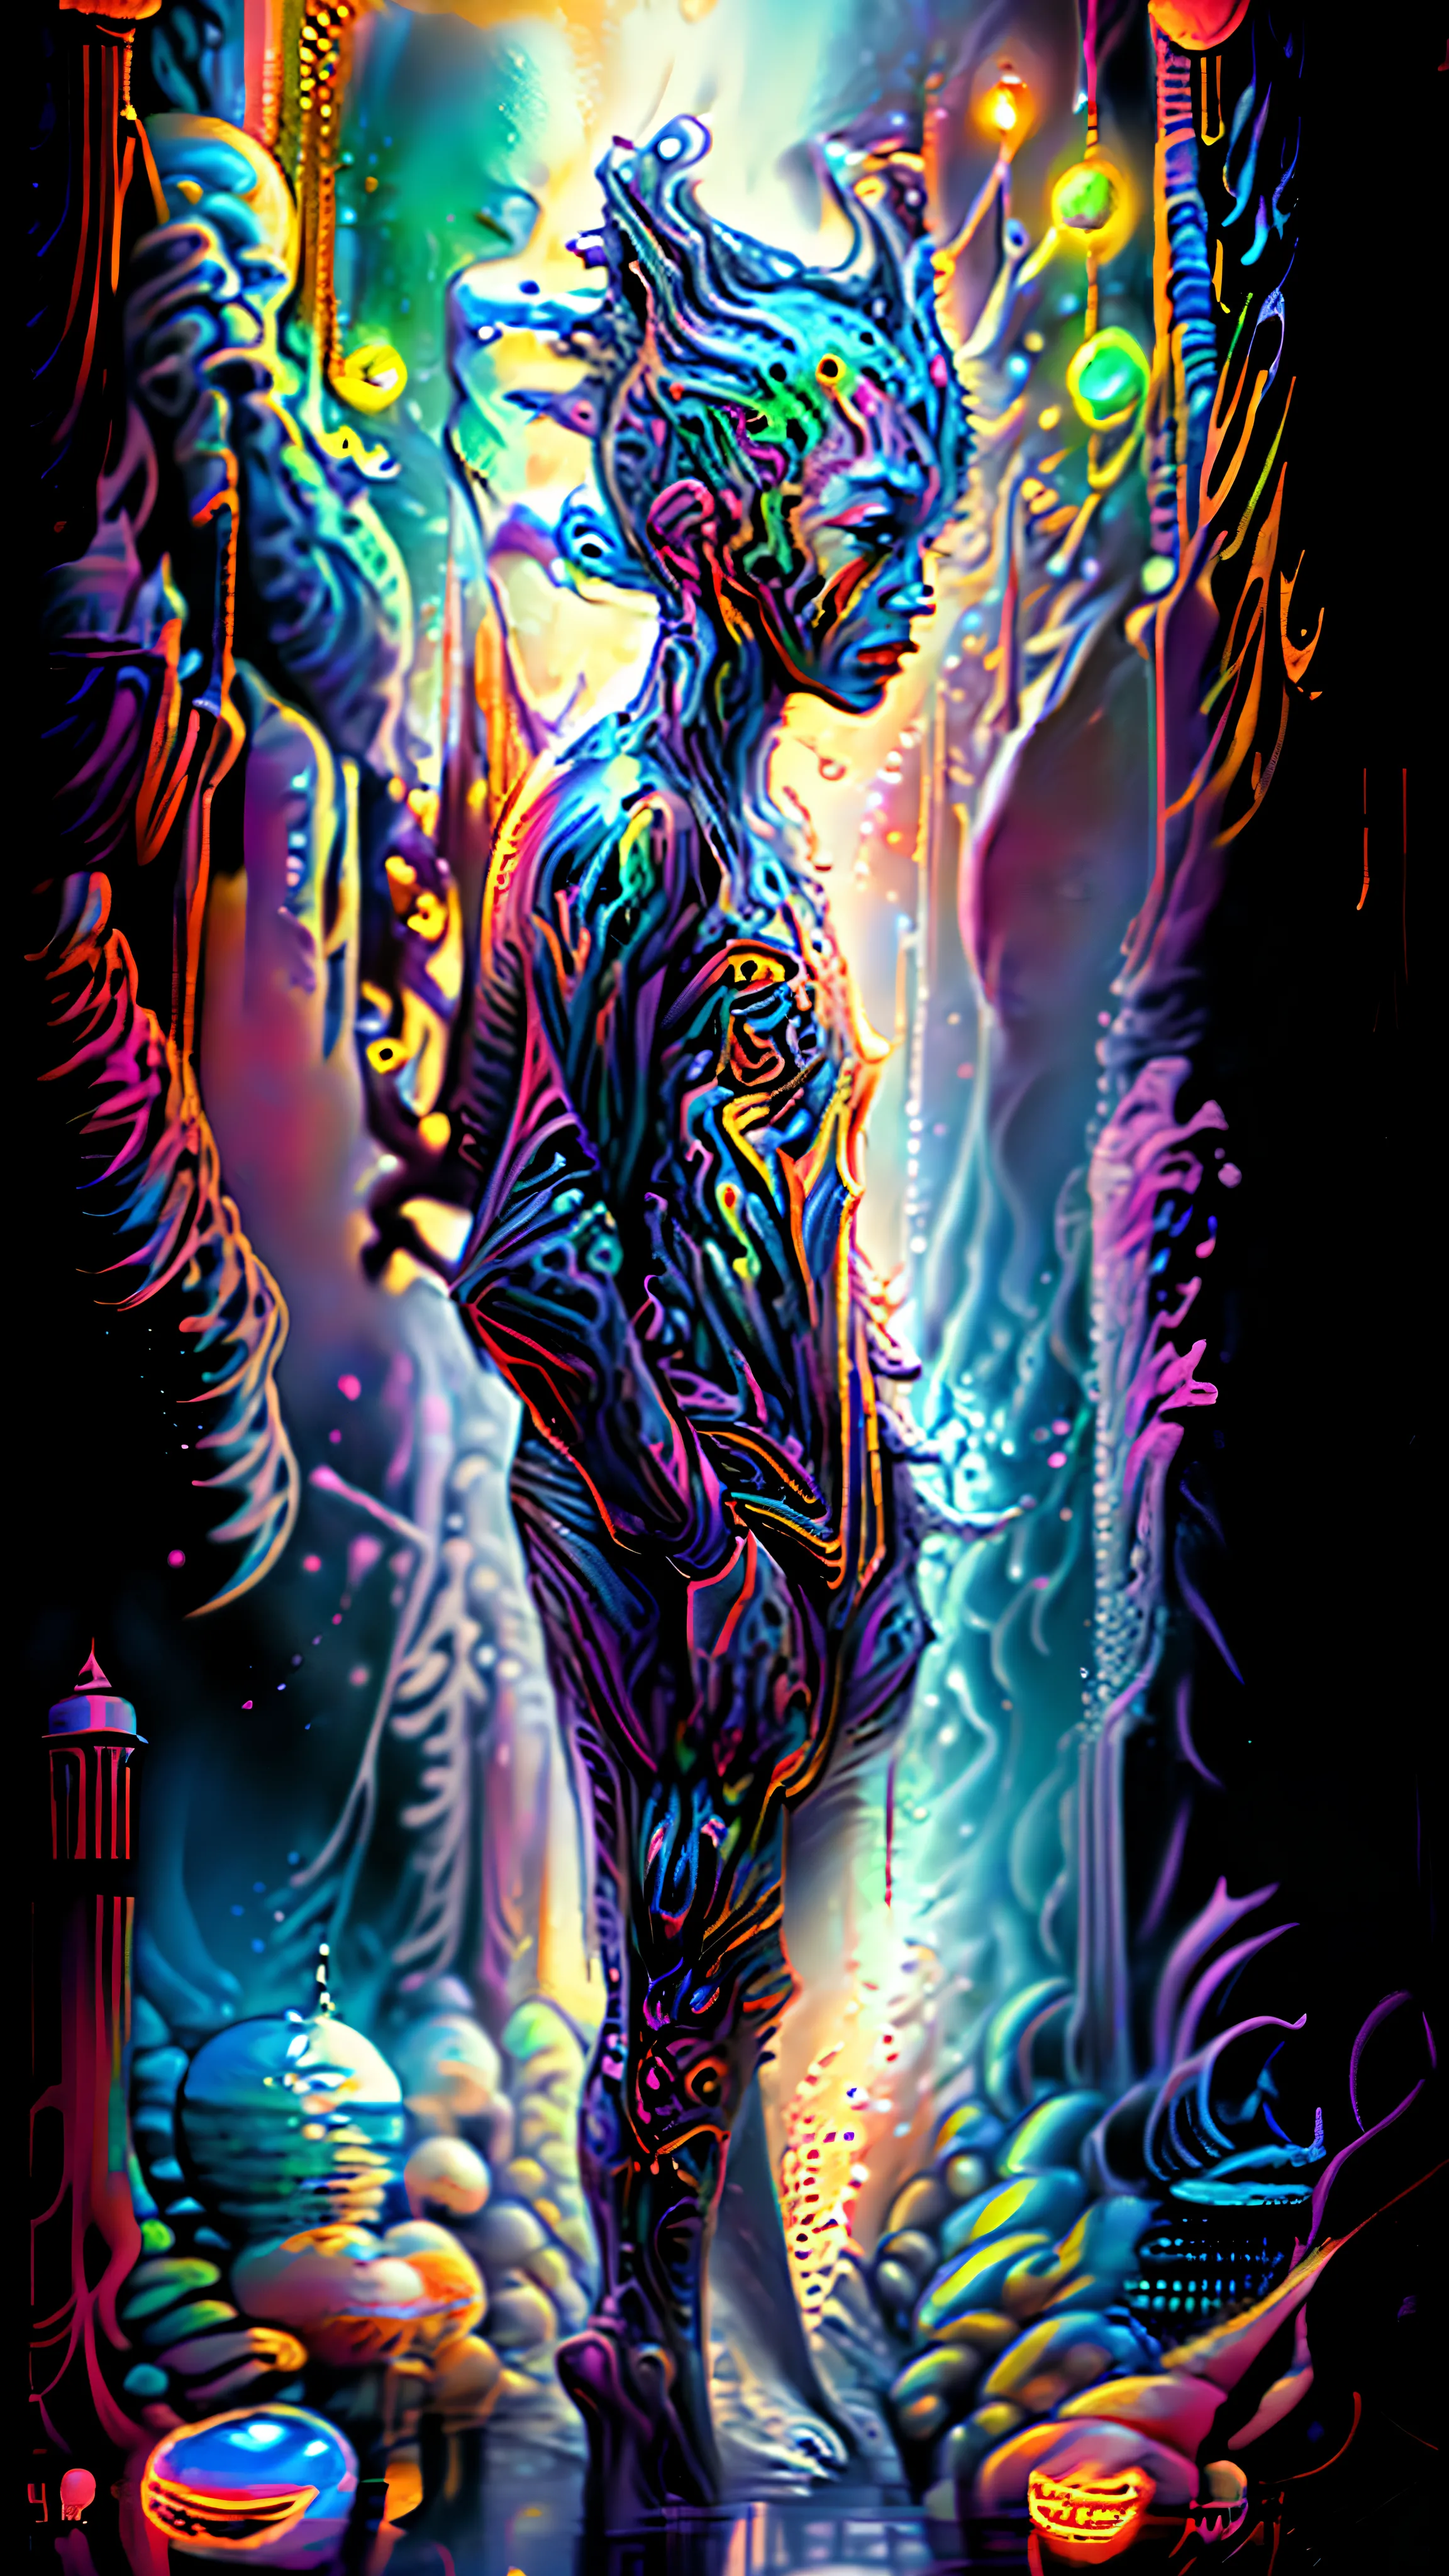 A thought-provoking optical illusion art piece created by Brandon Woelfel and Alex Grey (1.07), showcasing dreamlike elements, highly detailed and intricate, rendered in digital painting with a cinematic lighting setup. The image boasts intense, sharp focus and dramatic lighting, bringing out every minute detail in the best quality and hyper-detailed manner, resulting in an 8k resolution masterpiece that leaves one pondering the surreal beauty of the depicted scene.